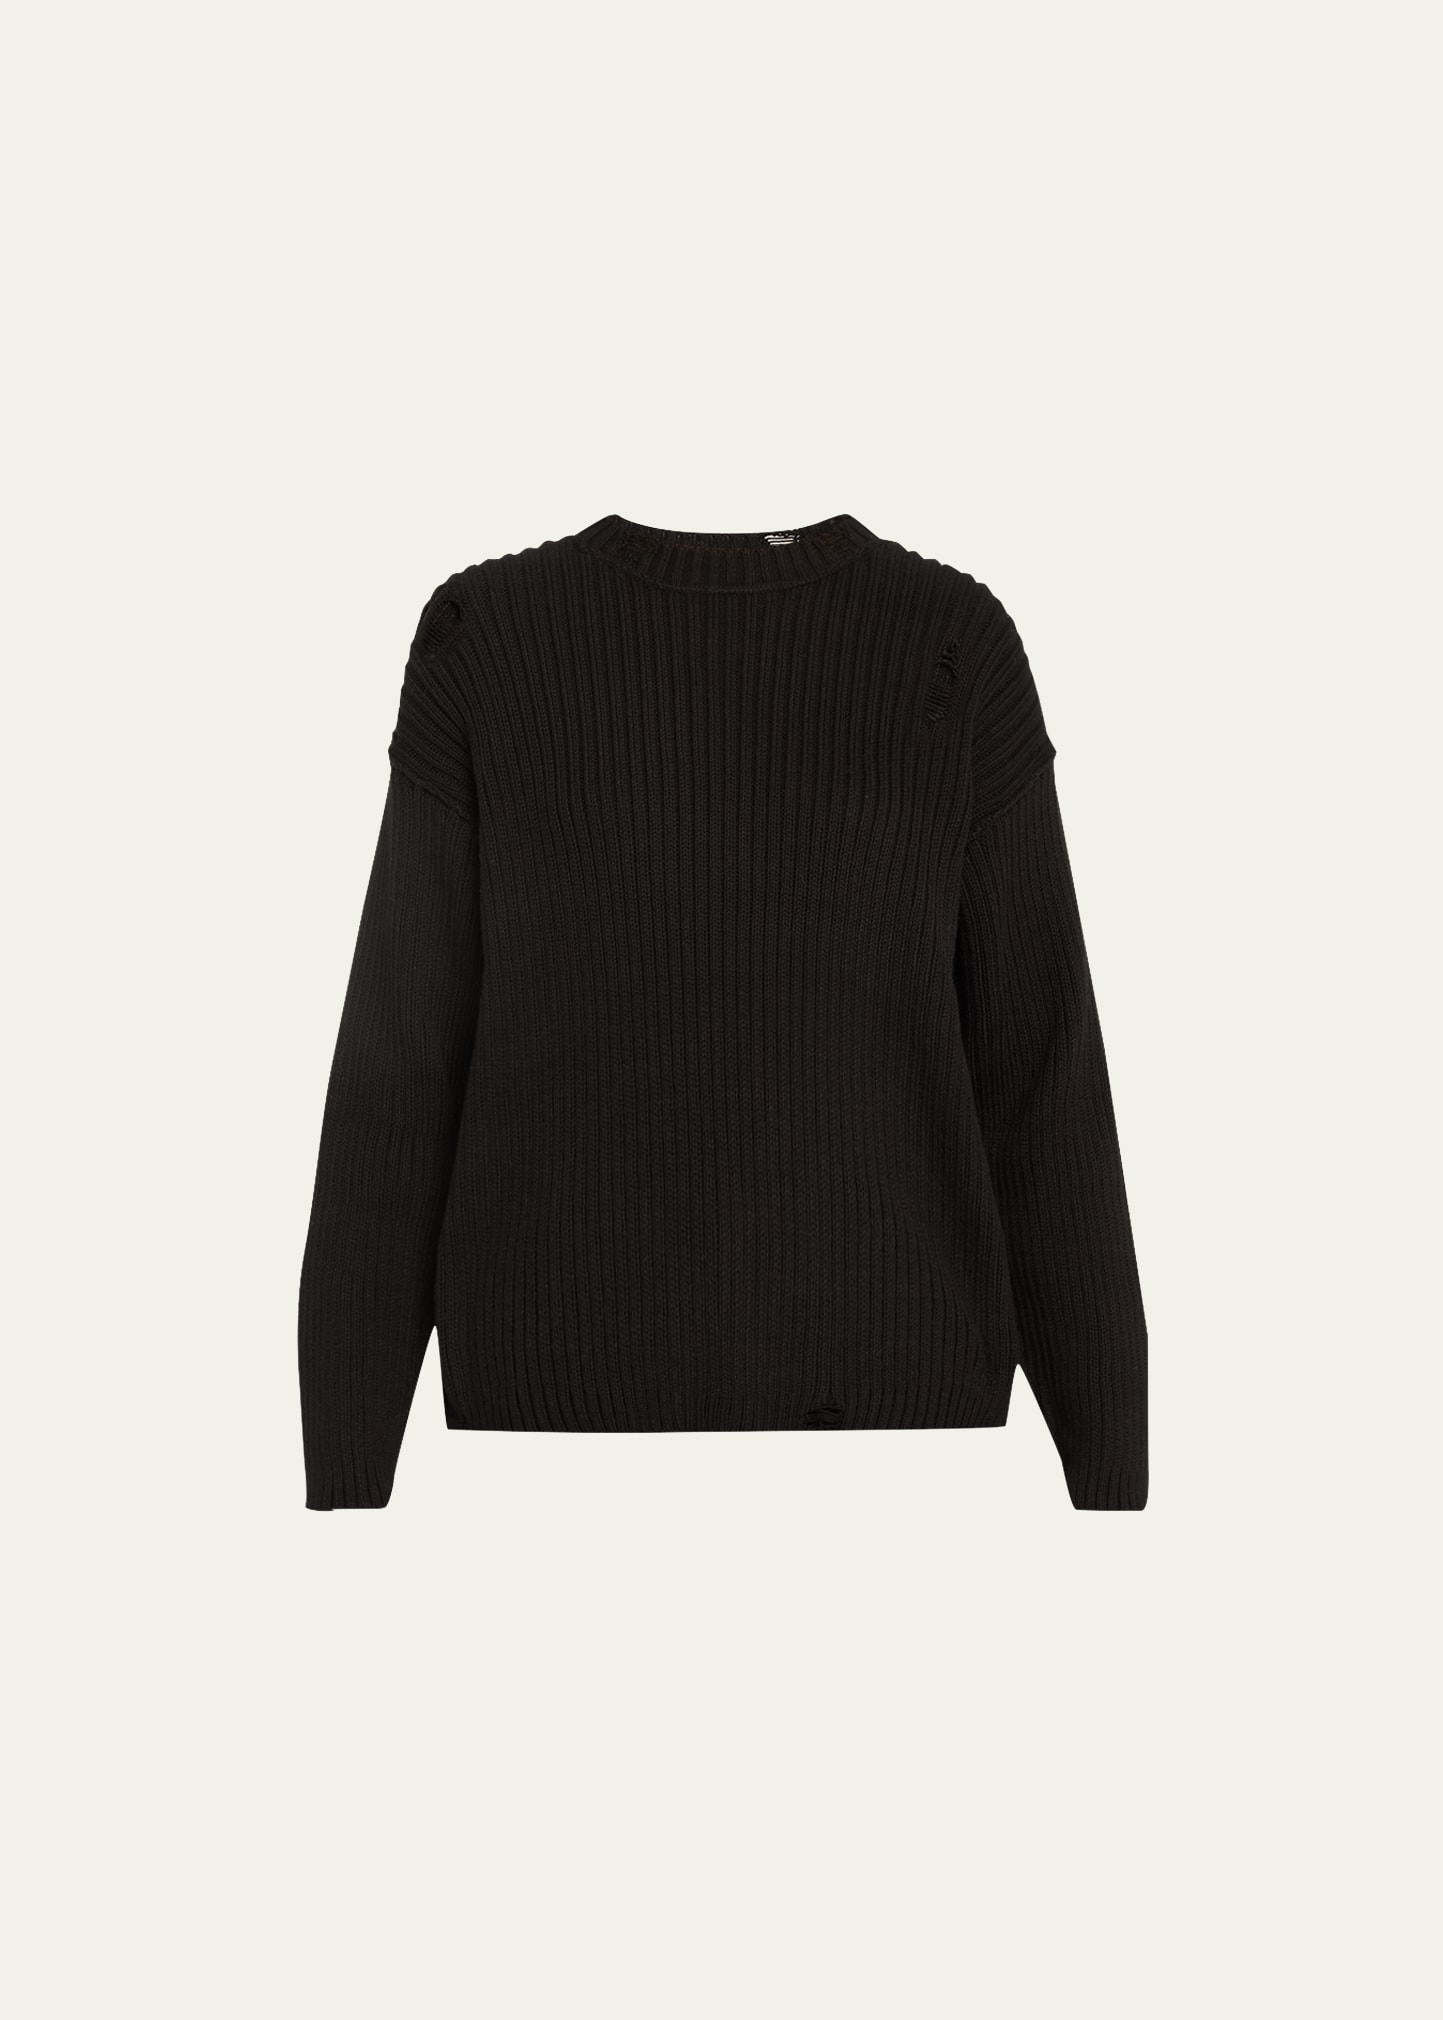 Nsf Clothing Freddy Ripped Cotton Knit Crew Sweater In Black